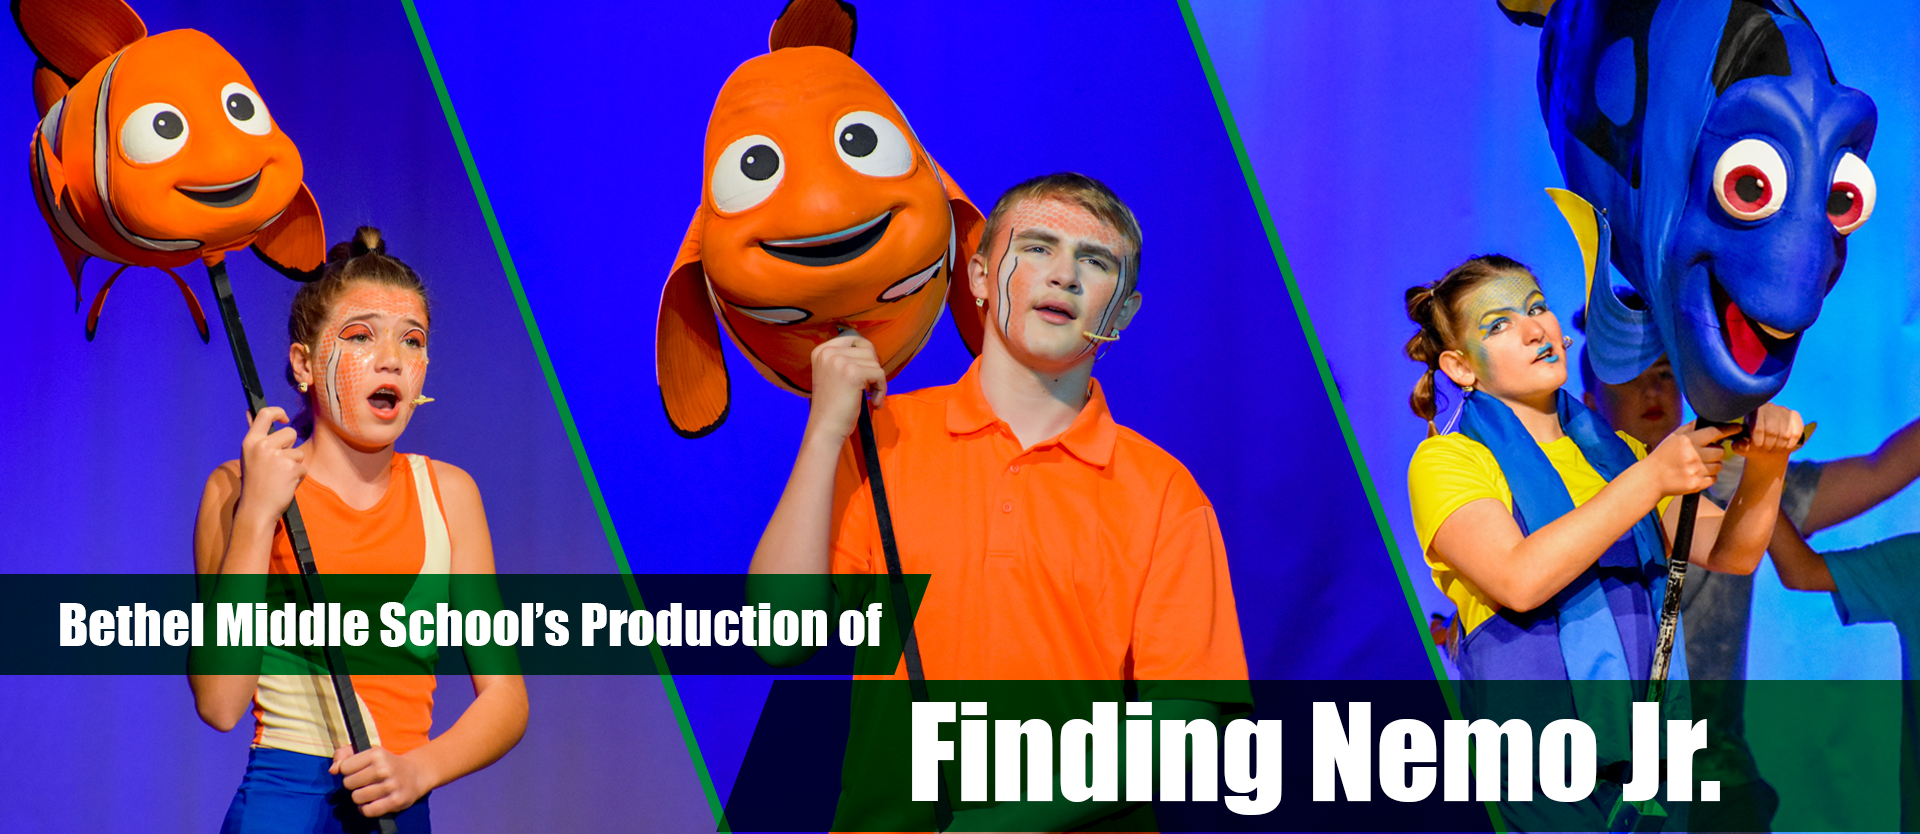 Bethel Middle School's Production of Finding Nemo Jr.